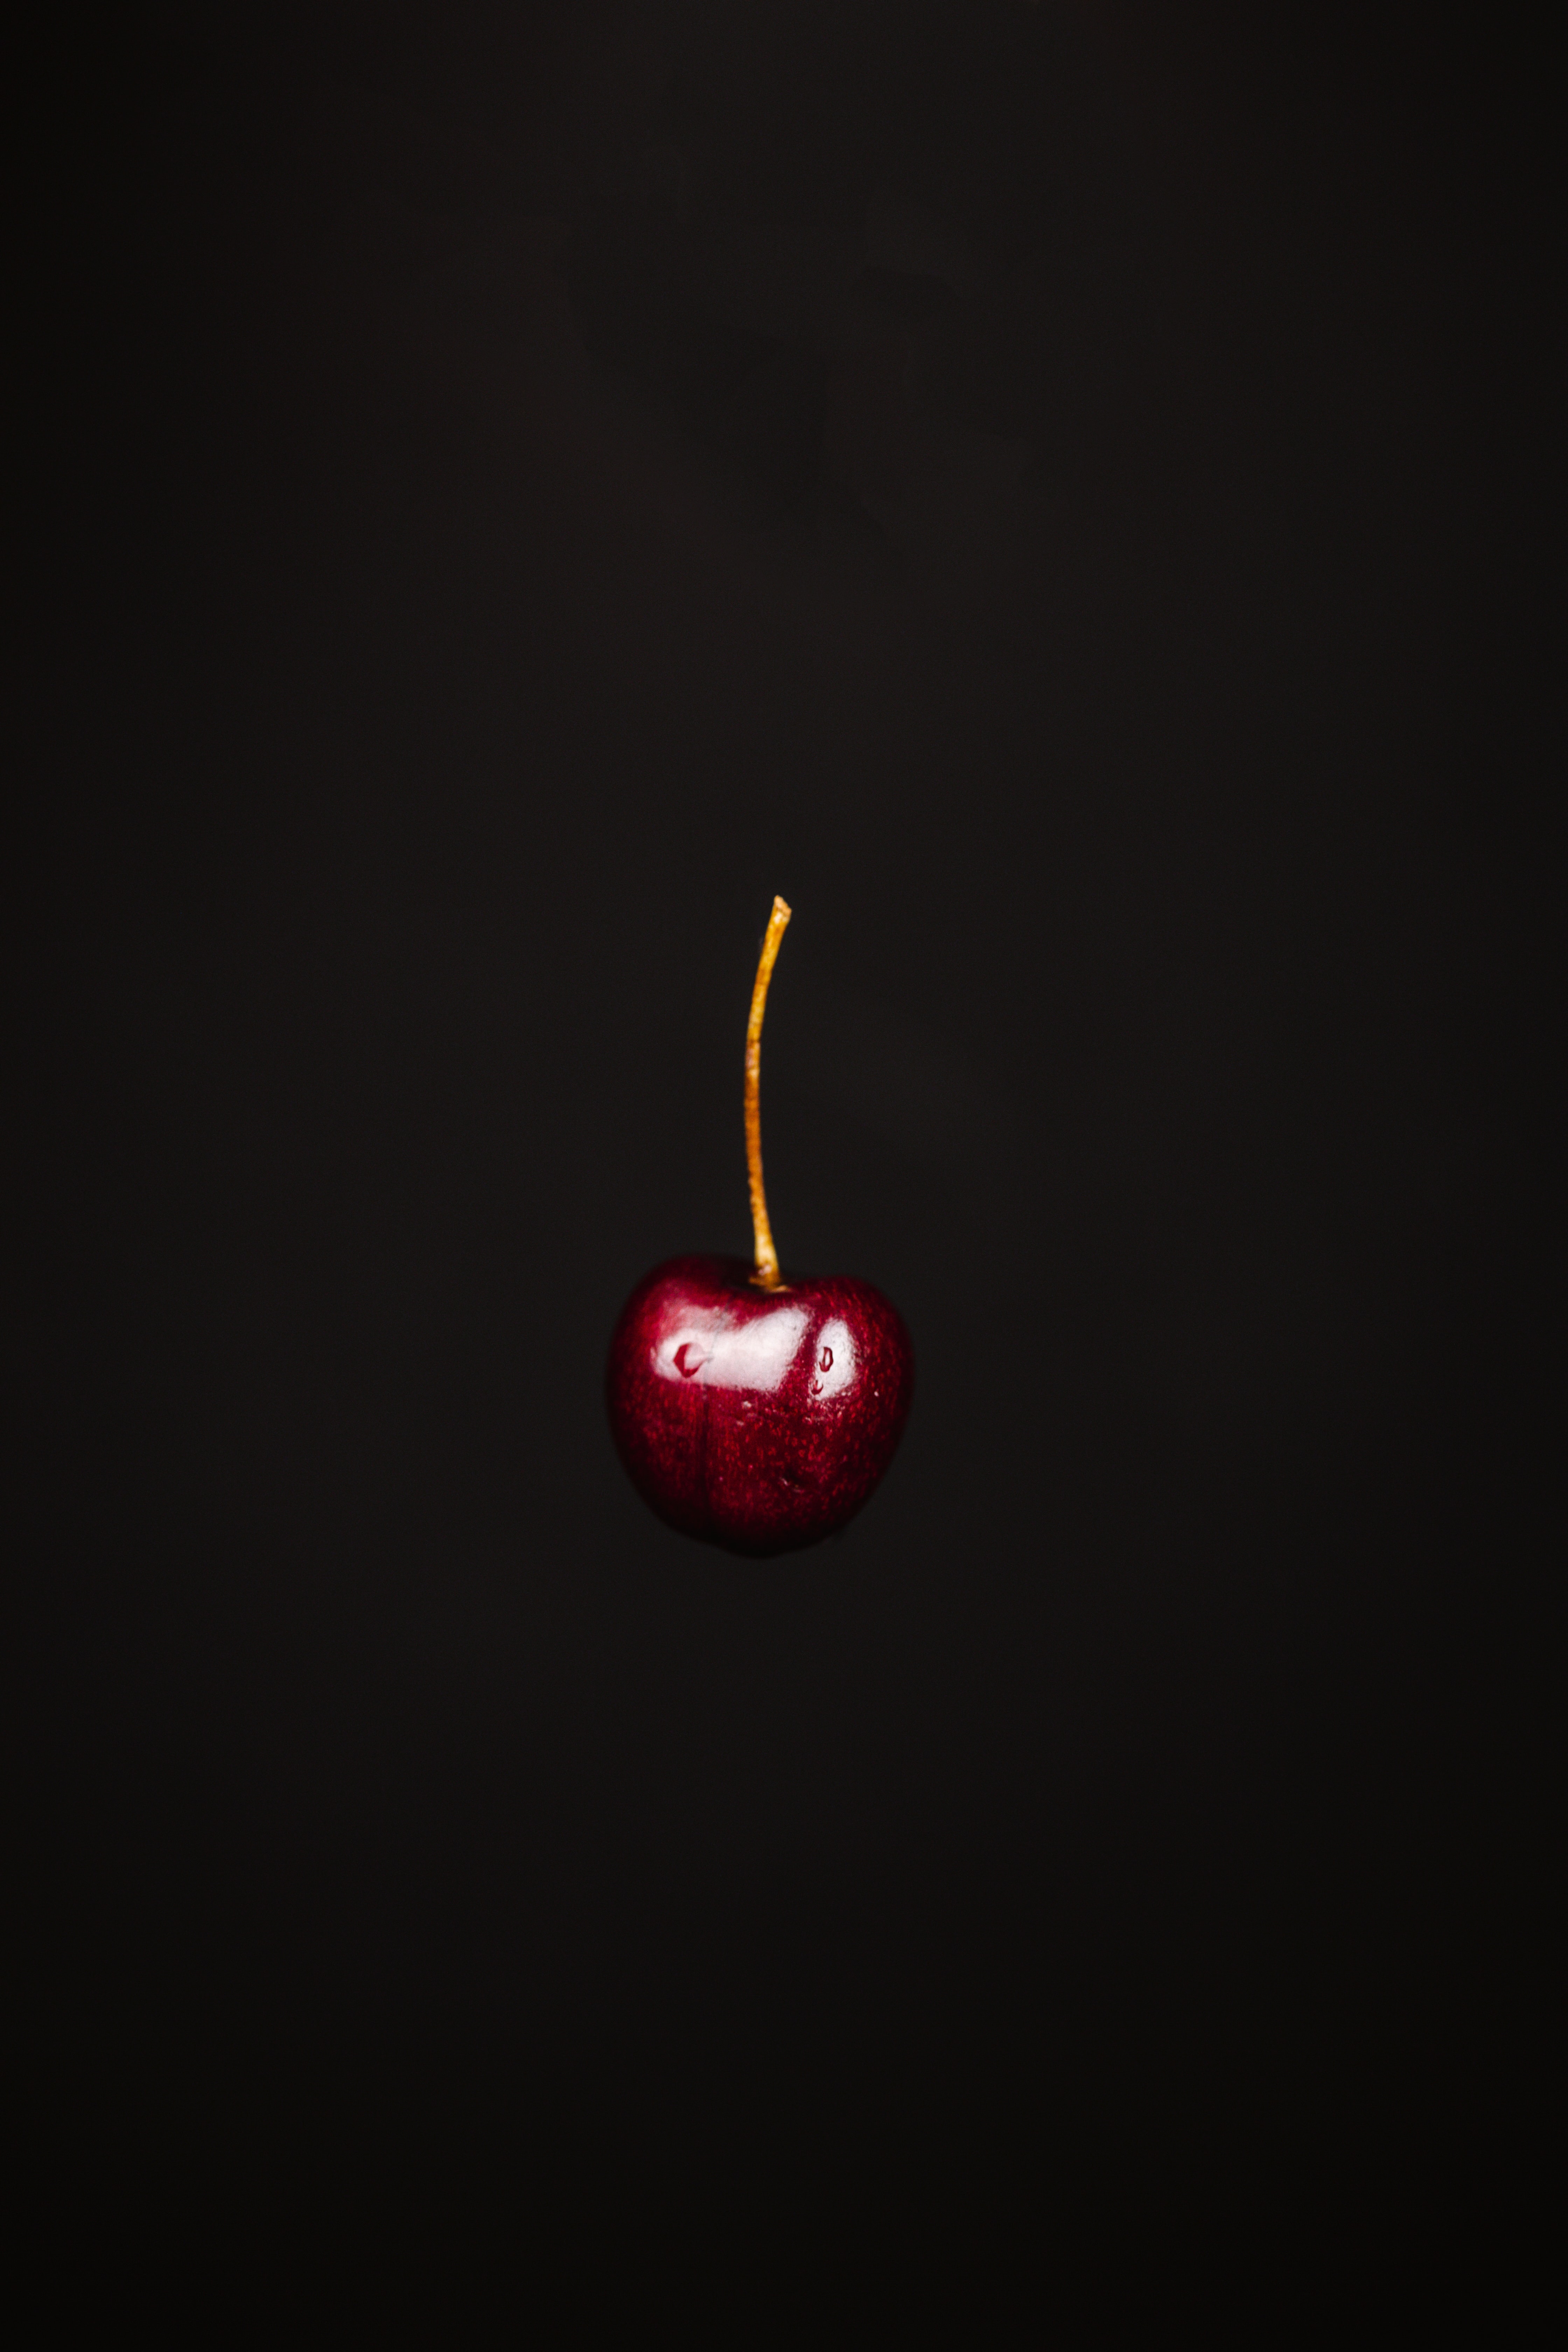 83209 download wallpaper fruits, sweet cherry, food, cherry, dark, berry screensavers and pictures for free